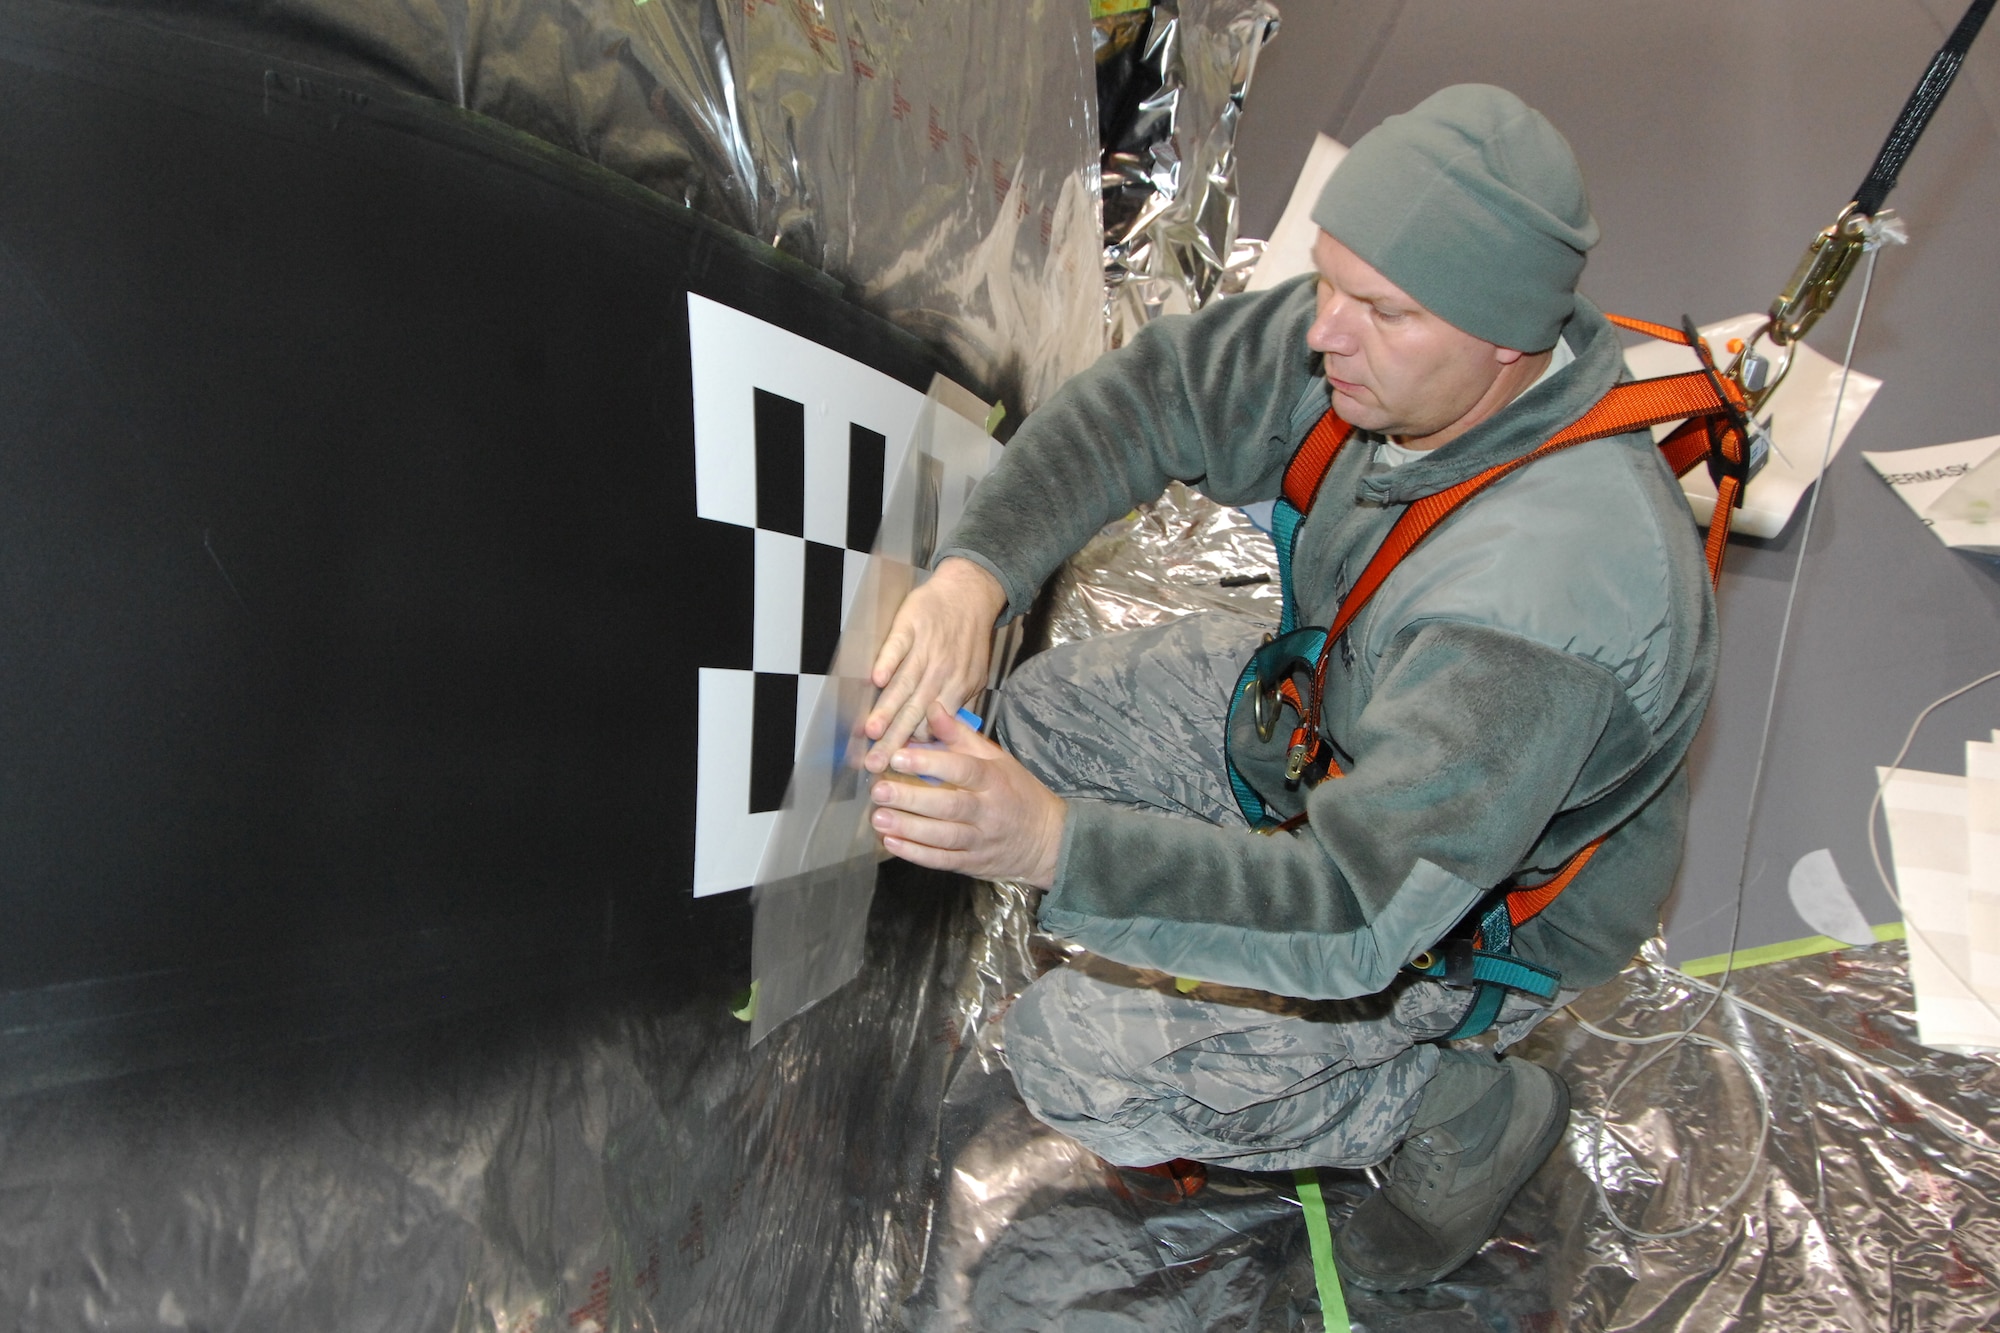 TSgt. Bart Davidson, 191st Maintenance Squadron, applies a masking material during the painting process of applying a new paint scheme to a KC-135 Stratotanker at Selfridge Air National Guard Base, Mich., Dec. 13, 2011. The aircraft was painted with a checkerboard stripe that honors both the heritage of the Michigan Air National Guard and the former Strategic Air Command, which once operated at Selfridge. (U.S. Air Force photo by John S. Swanson)